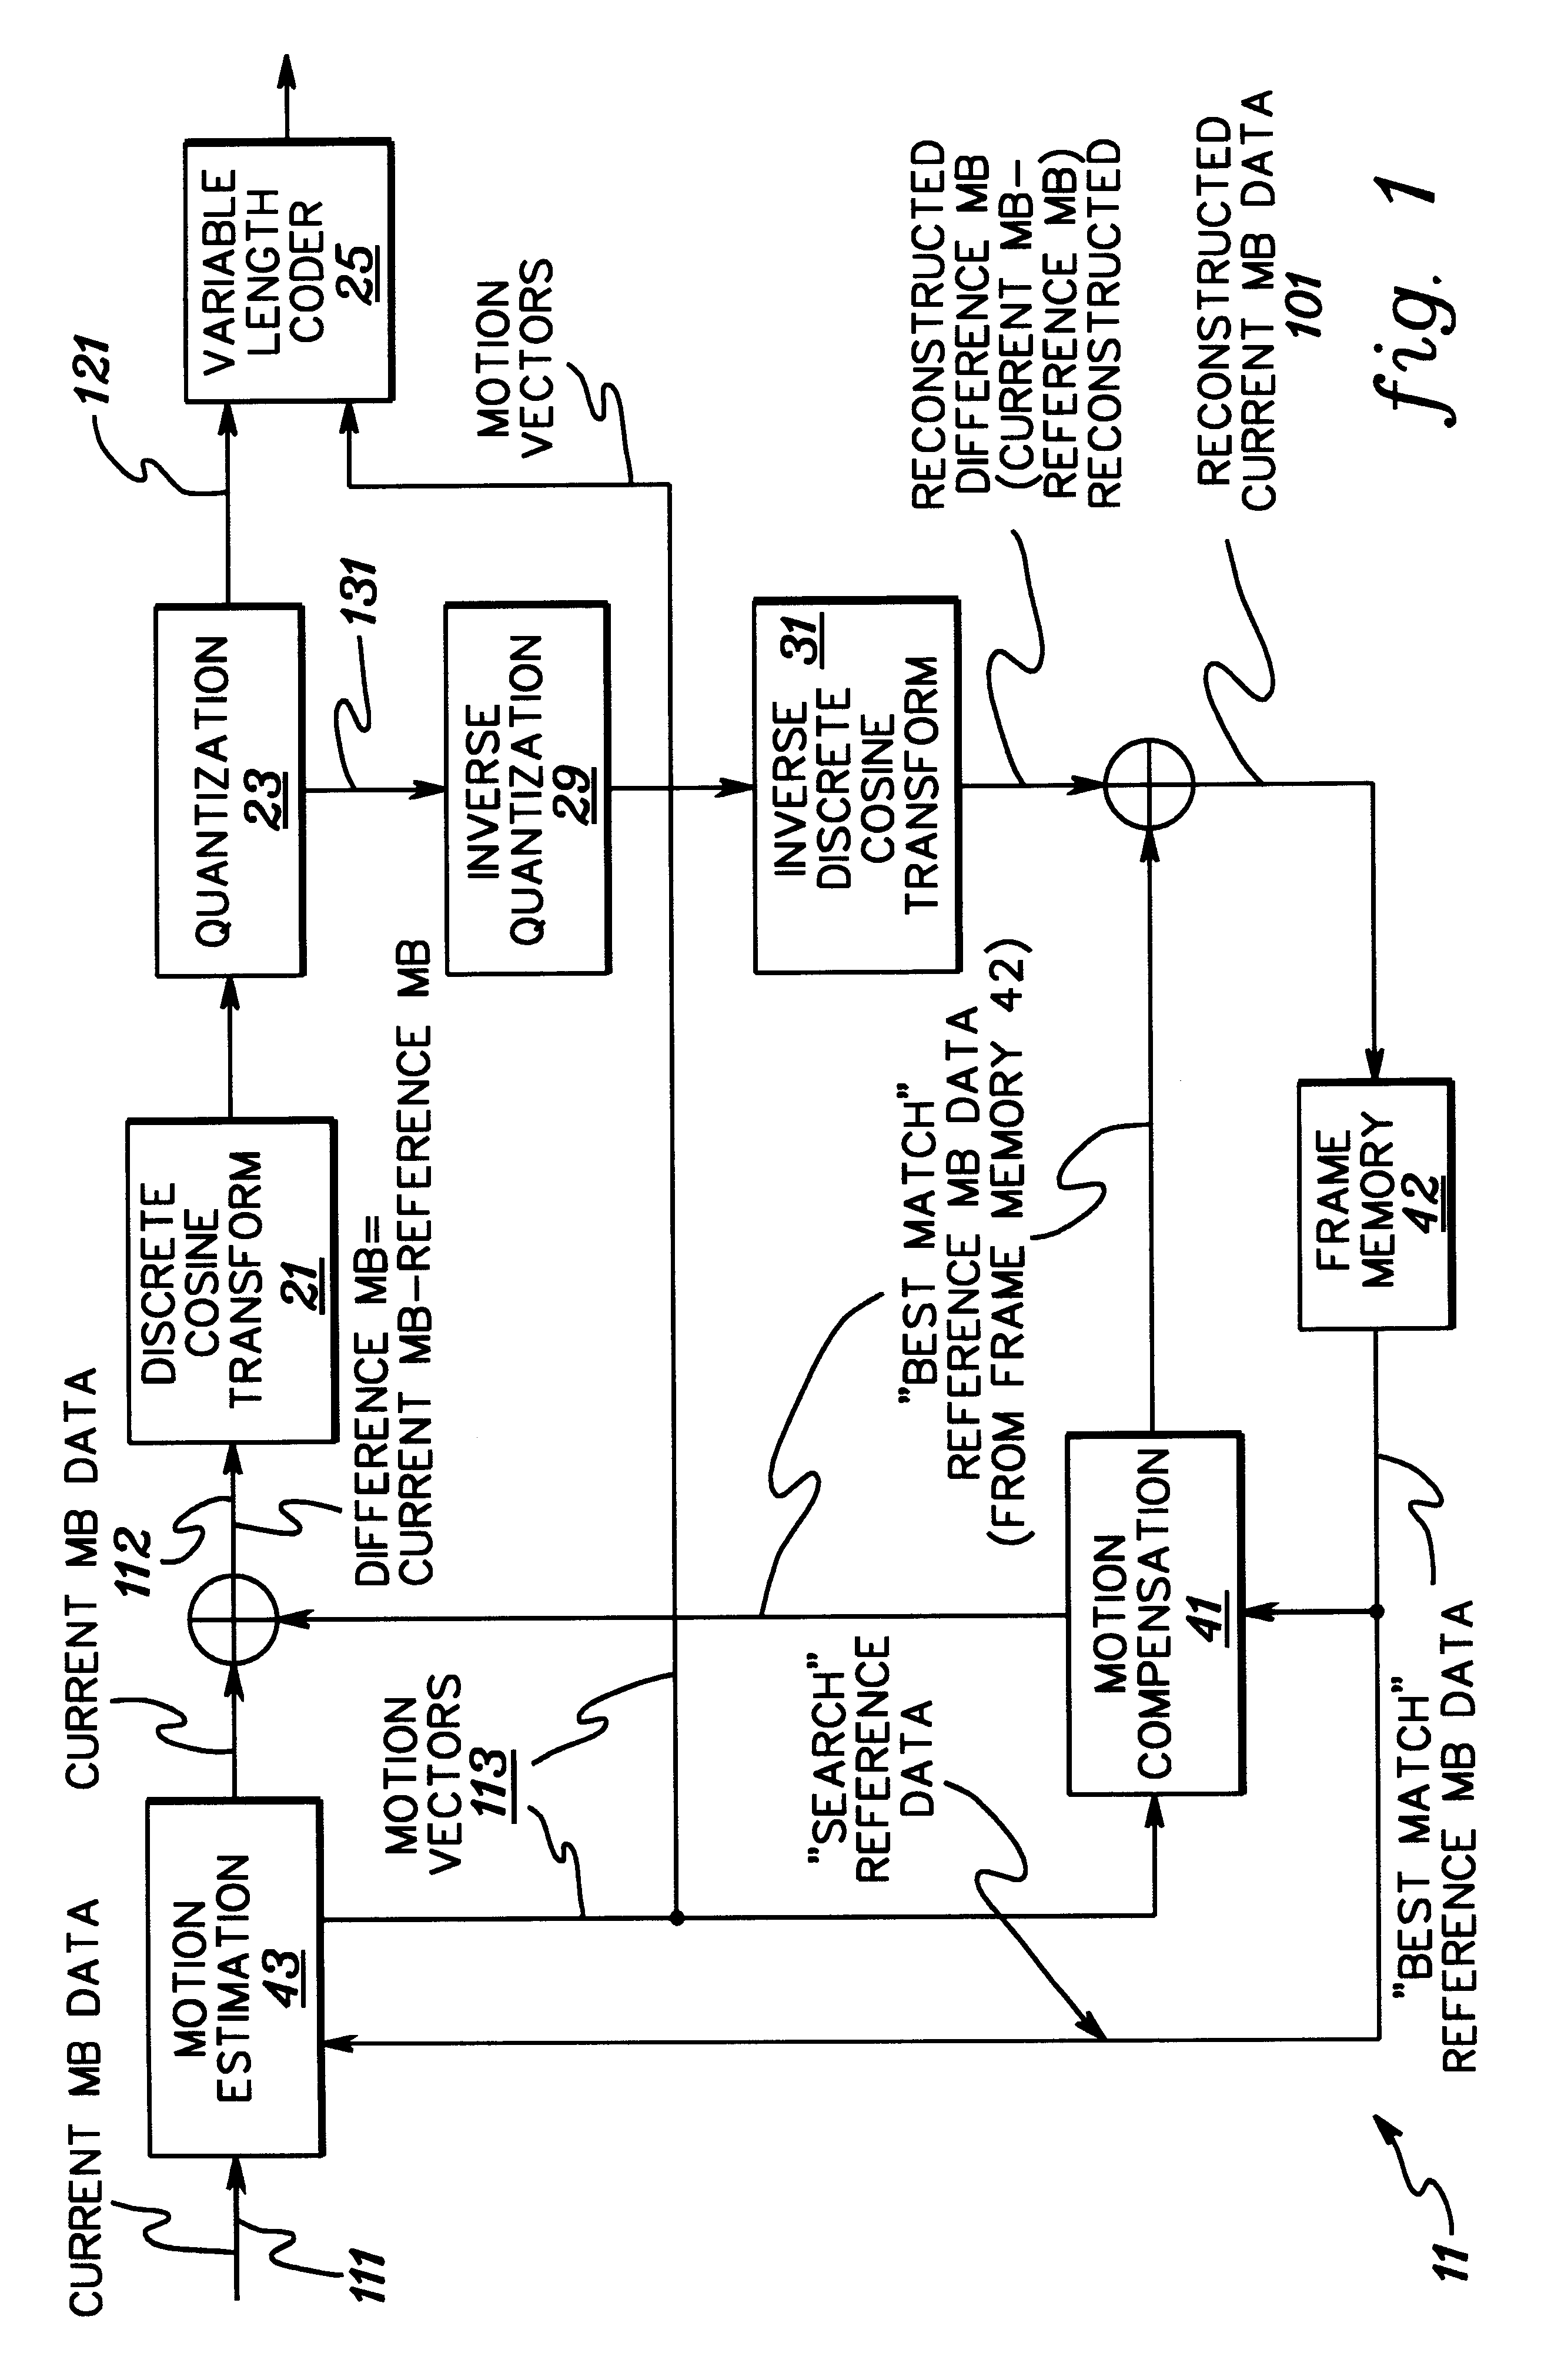 Adaptively encoding multiple streams of video data in parallel for multiplexing onto a constant bit rate channel